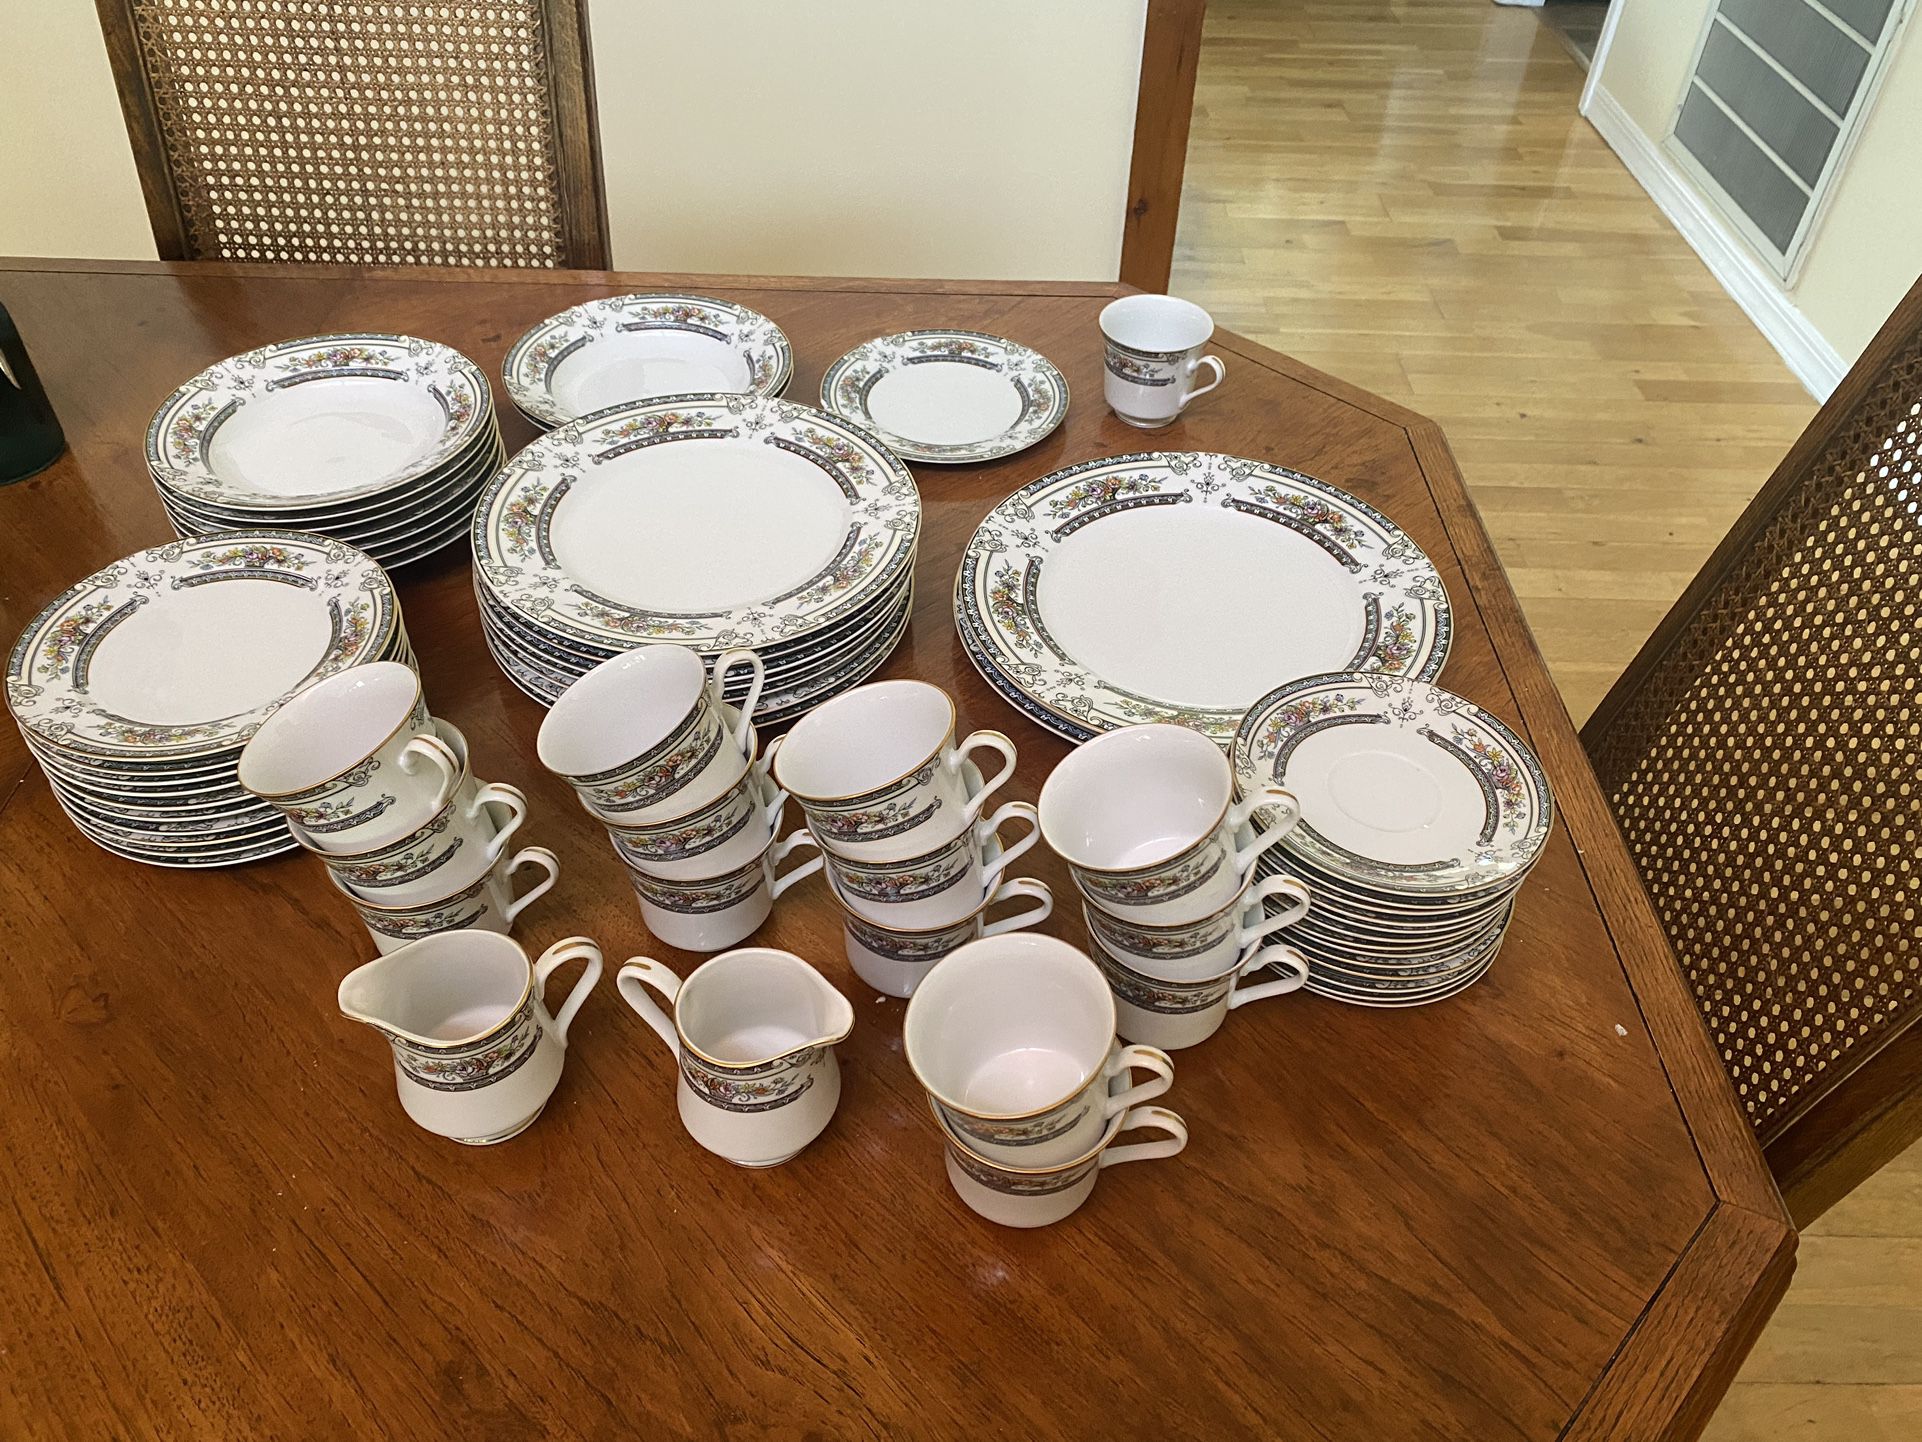 Mikasa Fine China Cambridge L9015 Japan 55 Pieces + 3 Pieces With Minor Chips